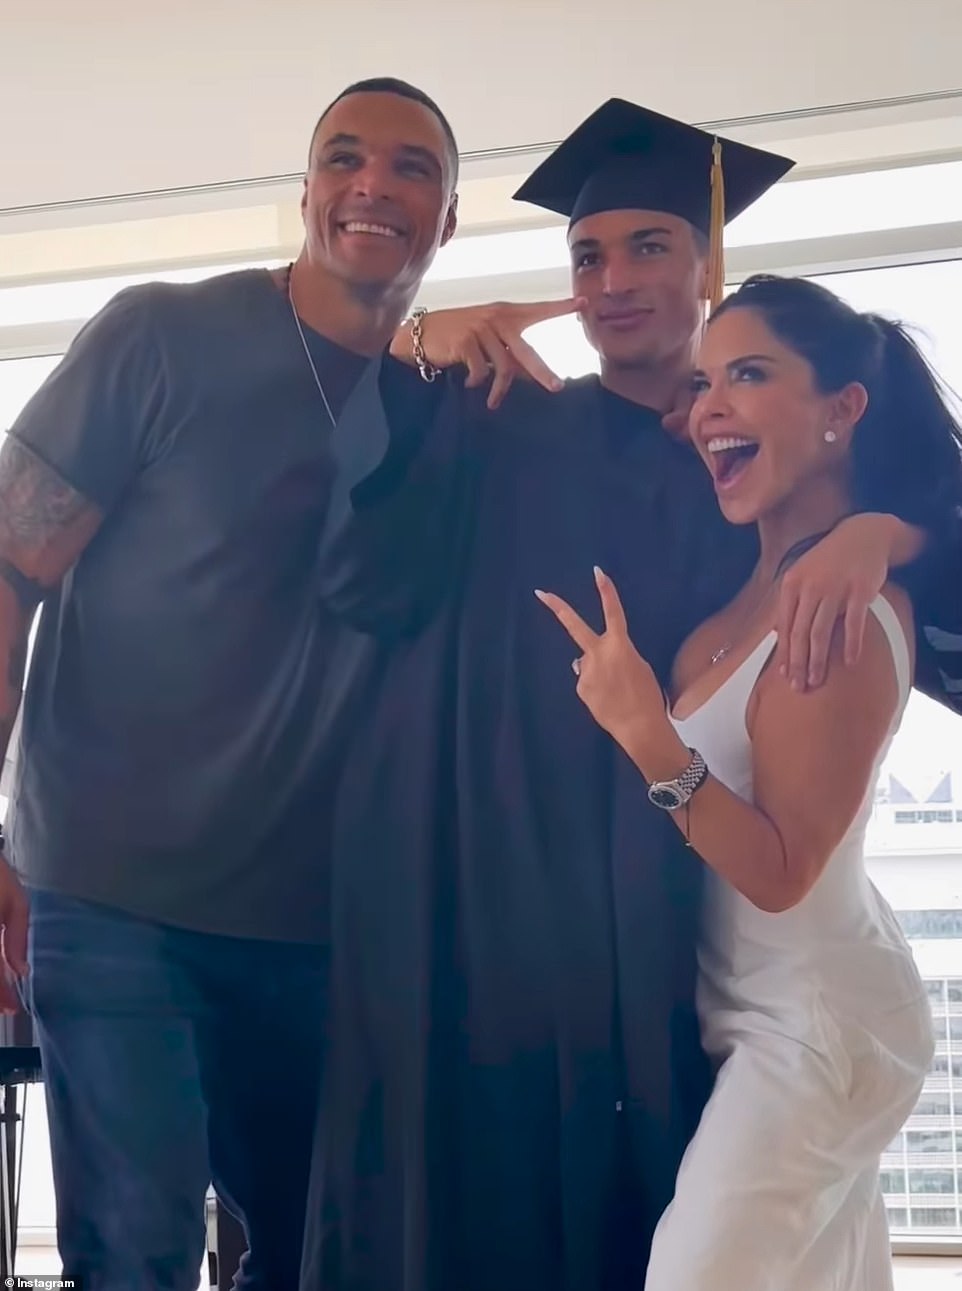 Just days before Lauren and Jeff's trip to Greece in early June, the former reporter put on another dazzling show as she and the Amazon founder celebrated her eldest son's graduation from college